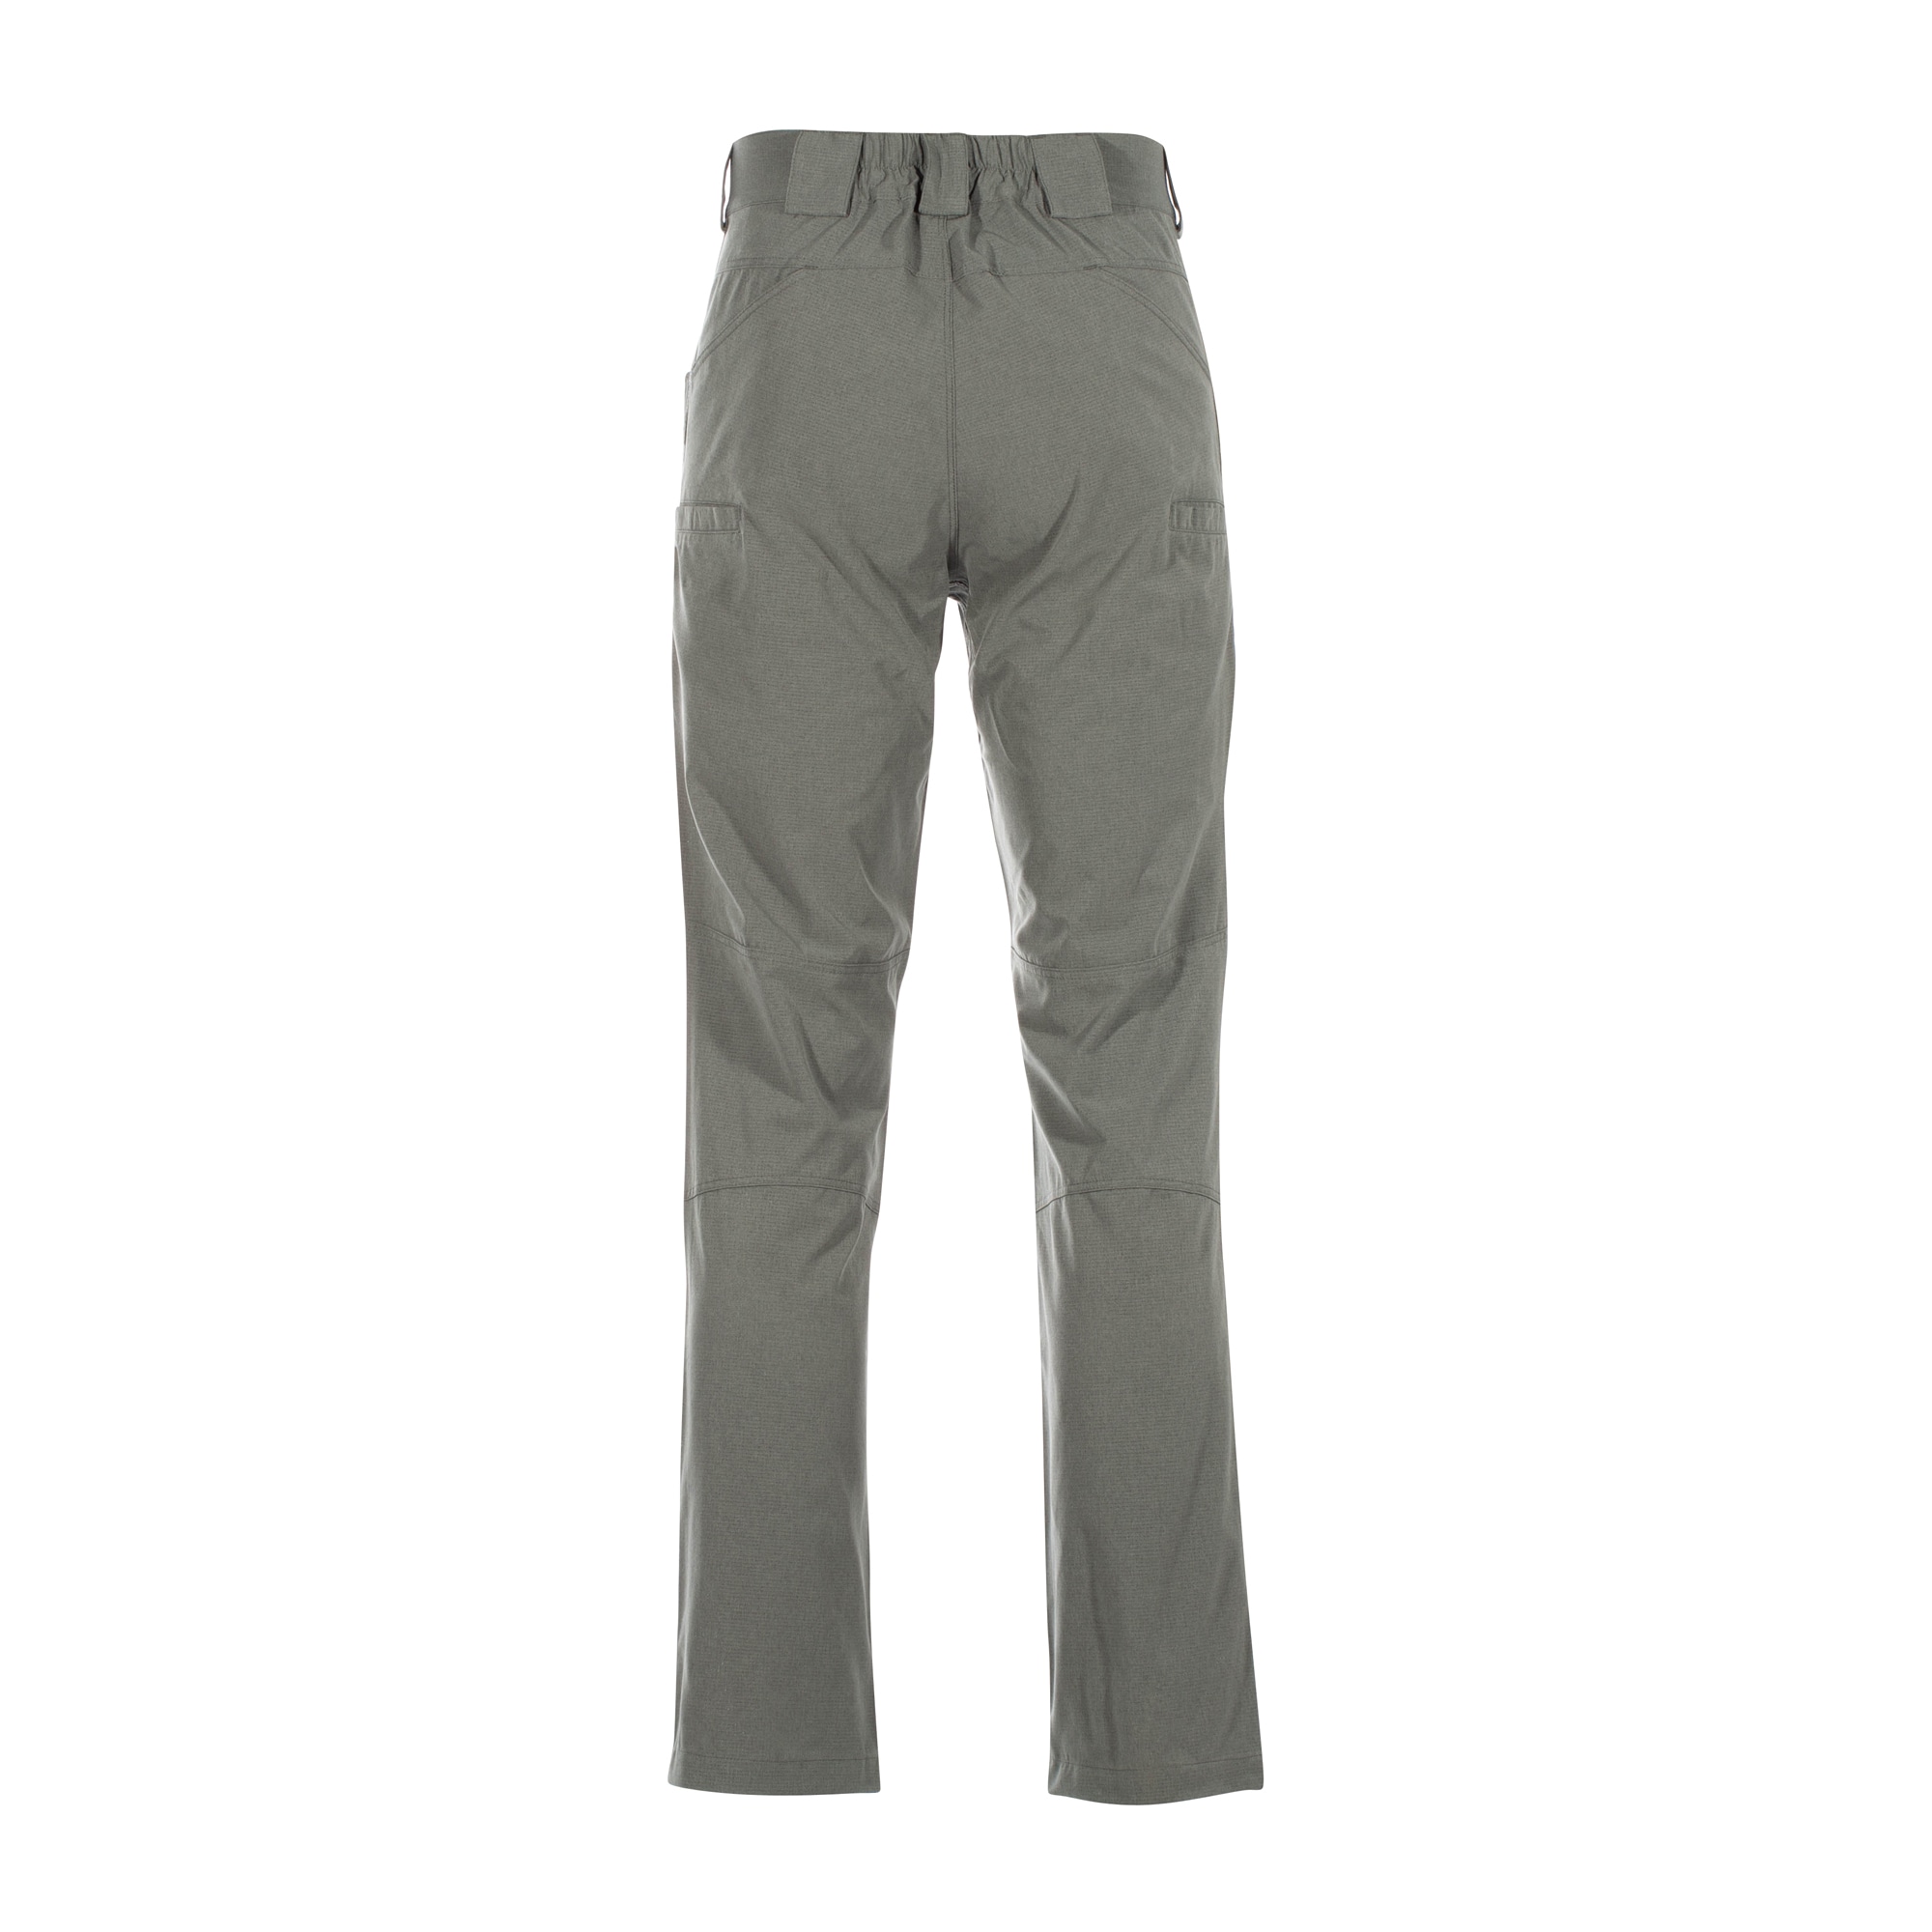 Purchase the Helikon-Tex Trekking Tactical Pants Aerotech olive